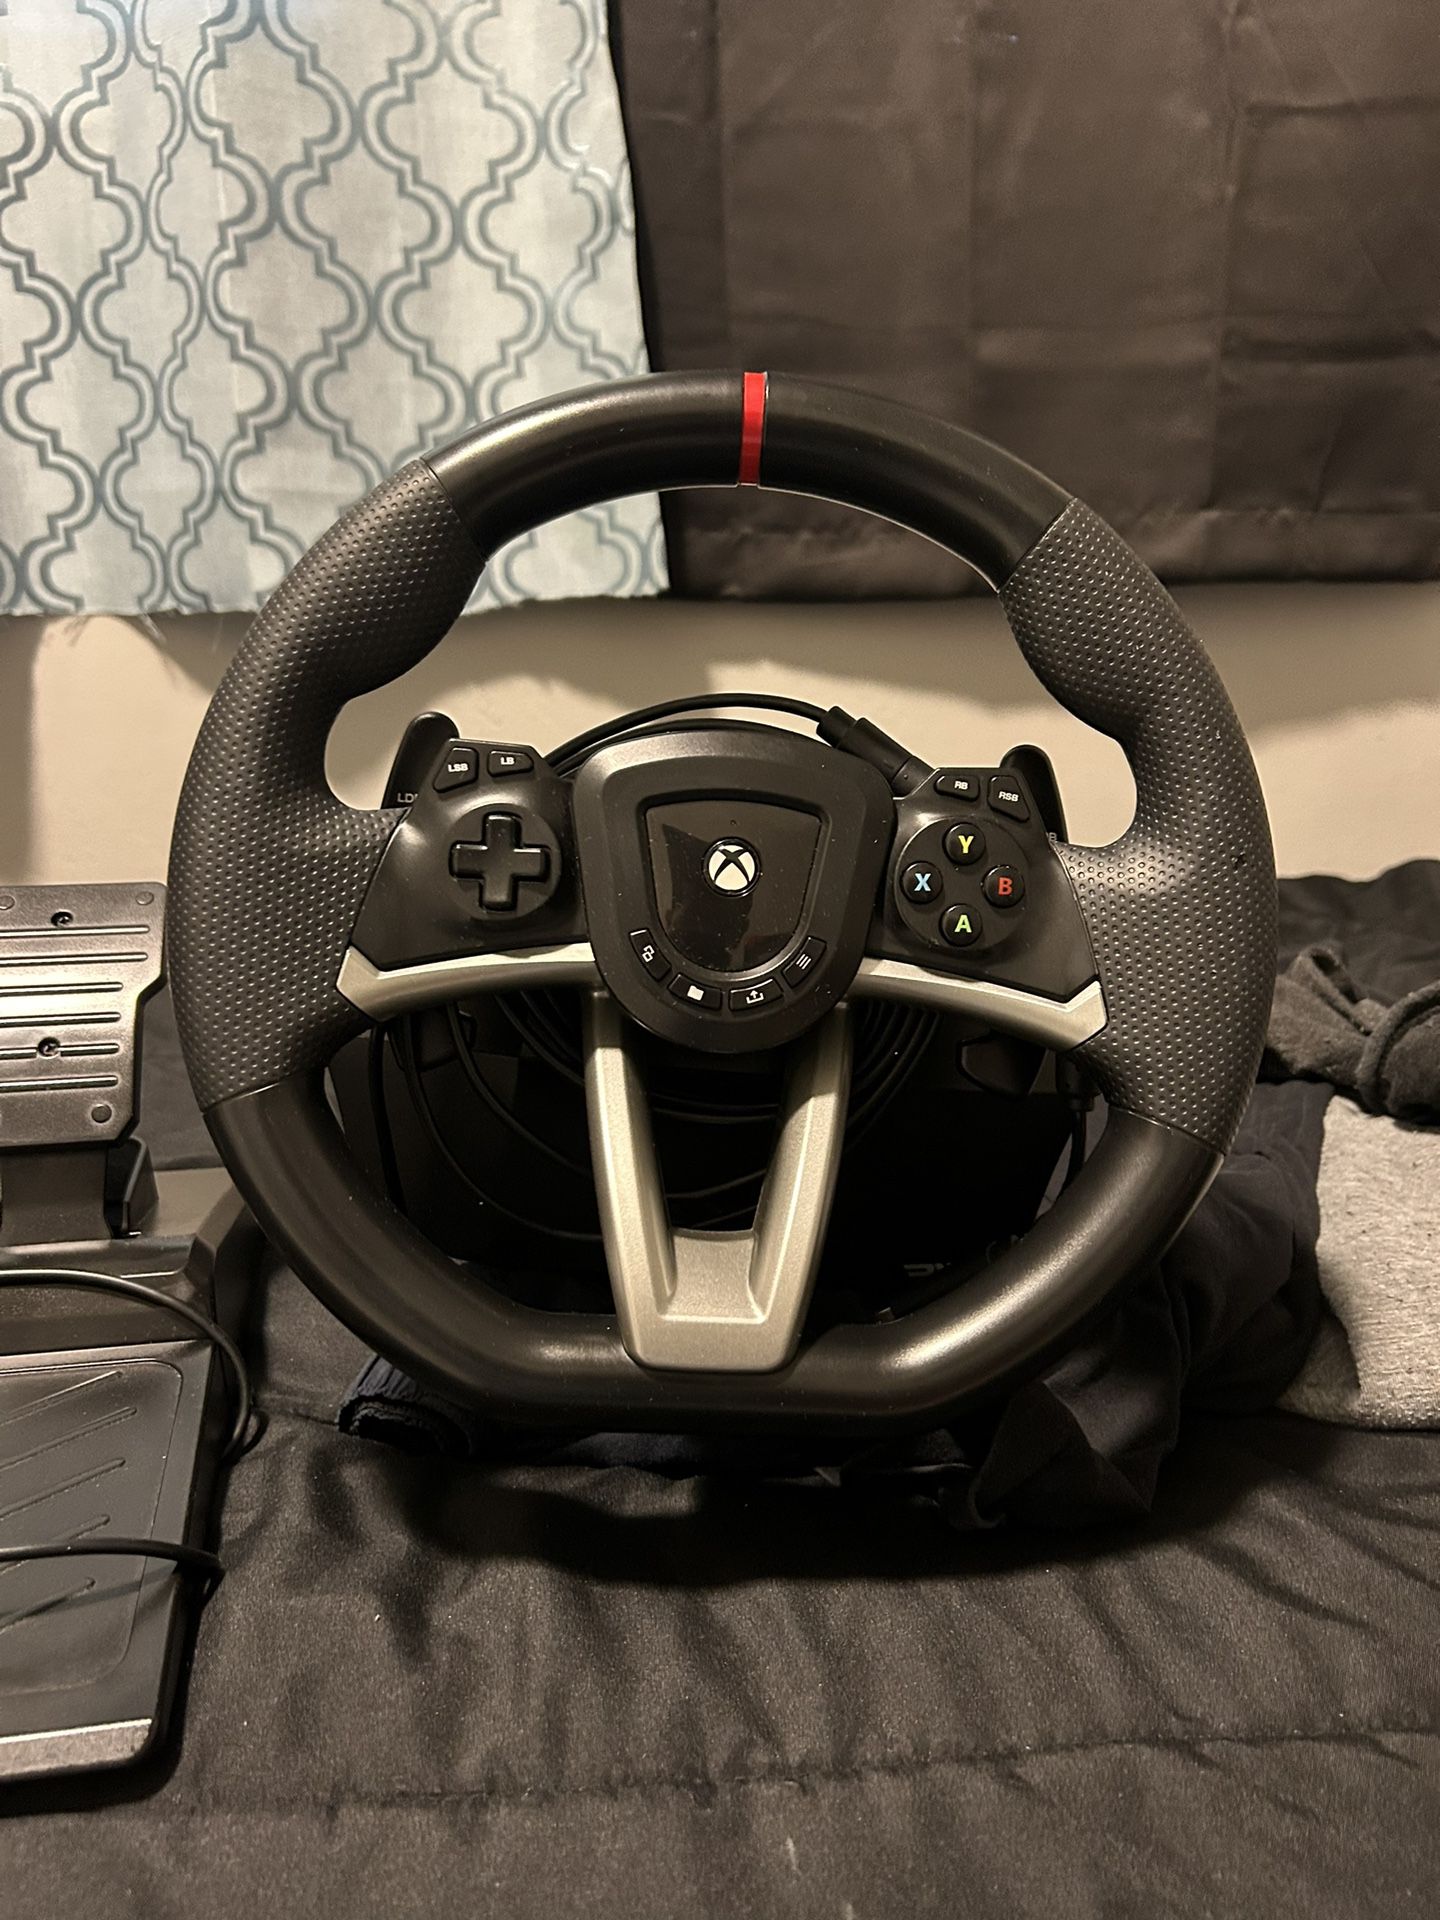 Racing Wheel Overdrive Designed for Xbox Series X|S By HORI - Officially Licensed by Microsoft